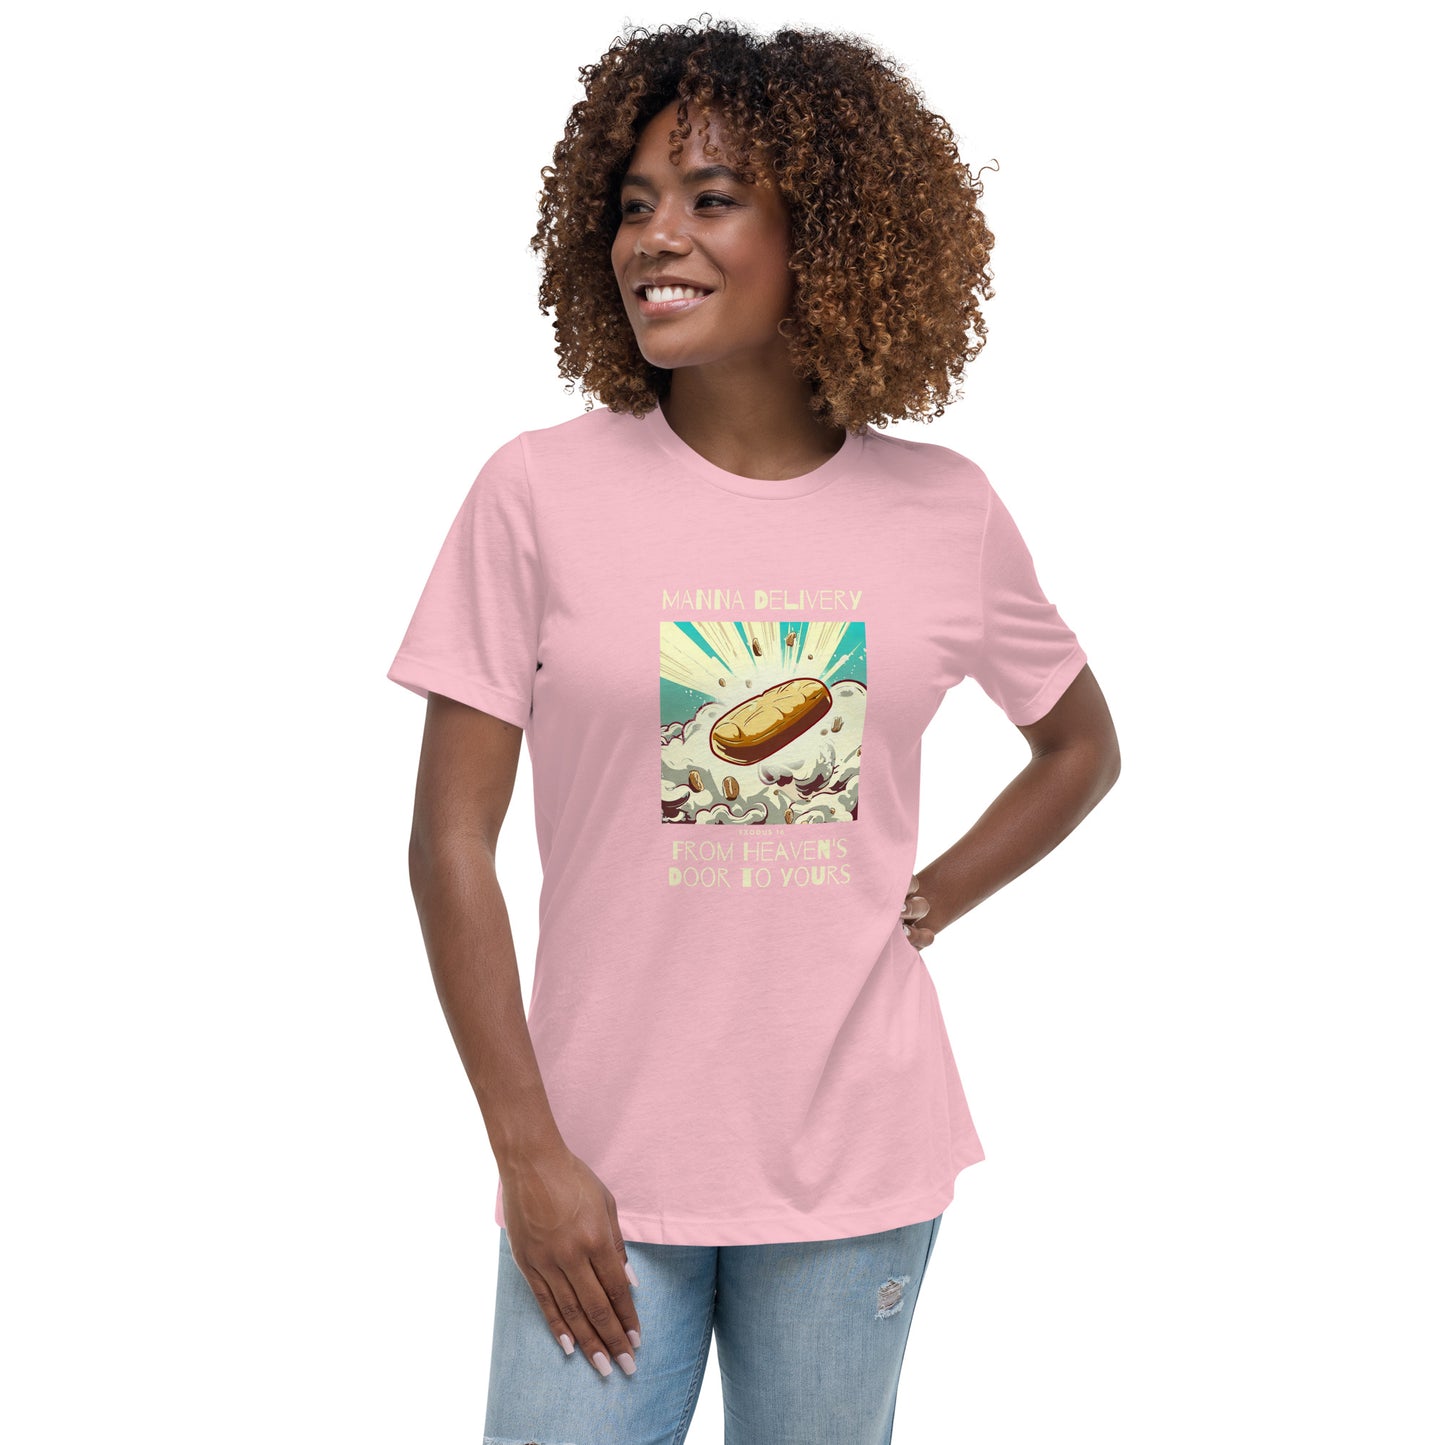 Manna Delivery "From Heaven's Door to Yours" (Yellow Print) Women's Relaxed T-Shirt